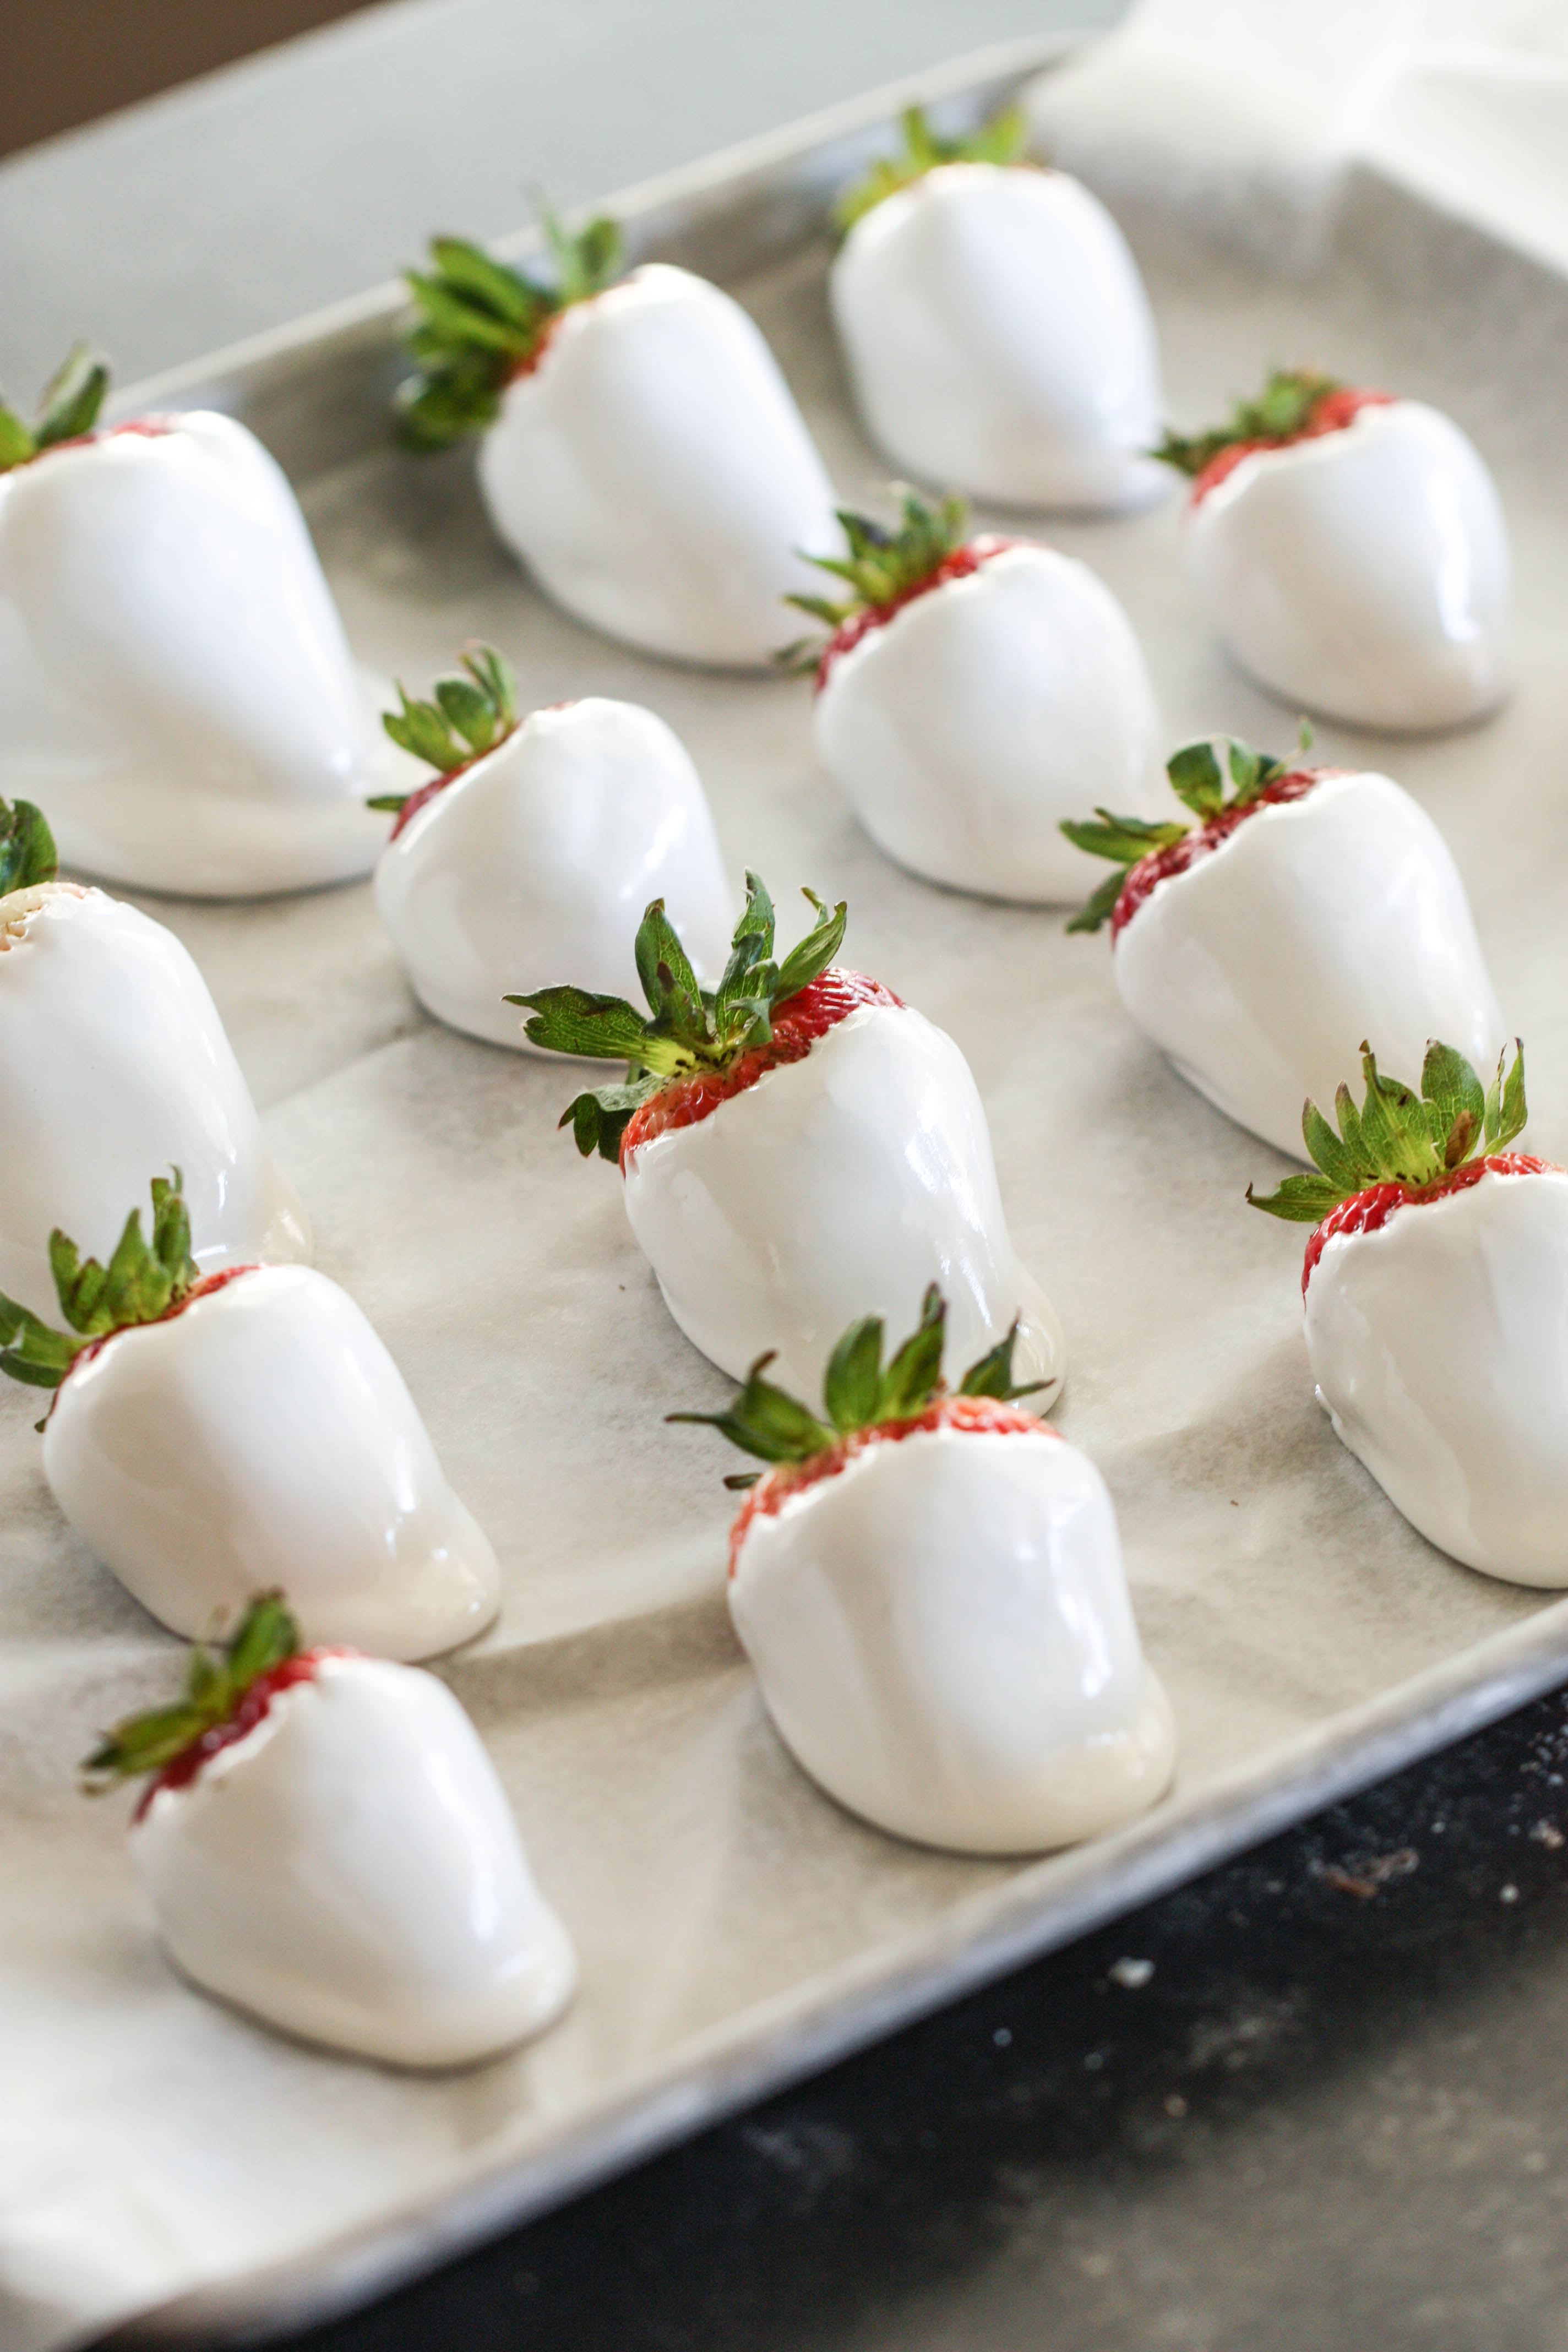 Marshmallow dipped strawberries on a sheet pan